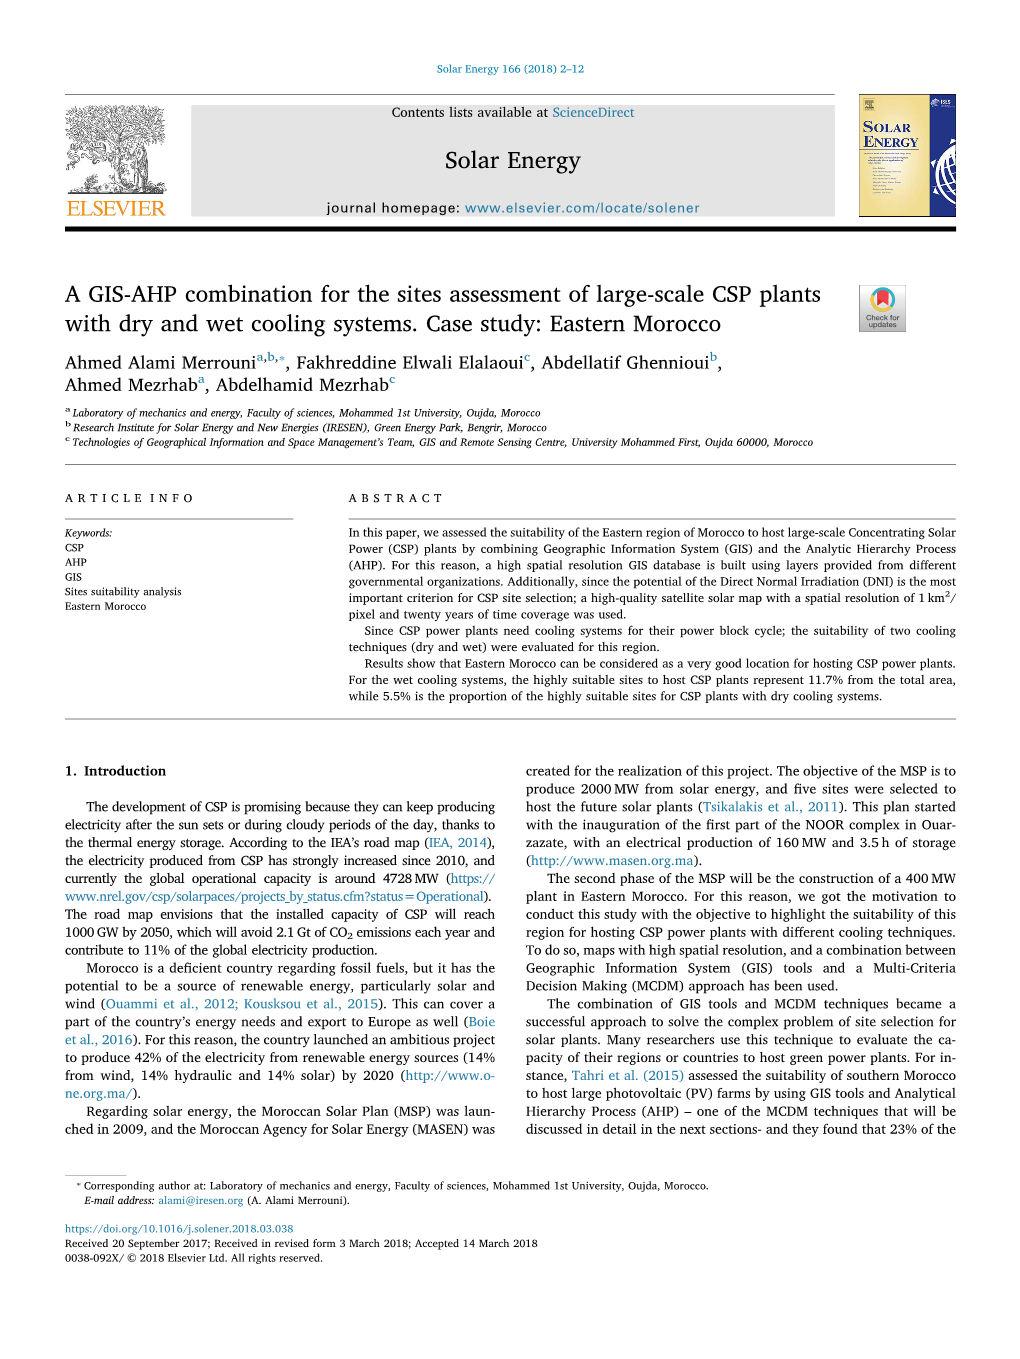 A GIS-AHP Combination for the Sites Assessment of Large-Scale CSP Plants 7 with Dry and Wet Cooling Systems